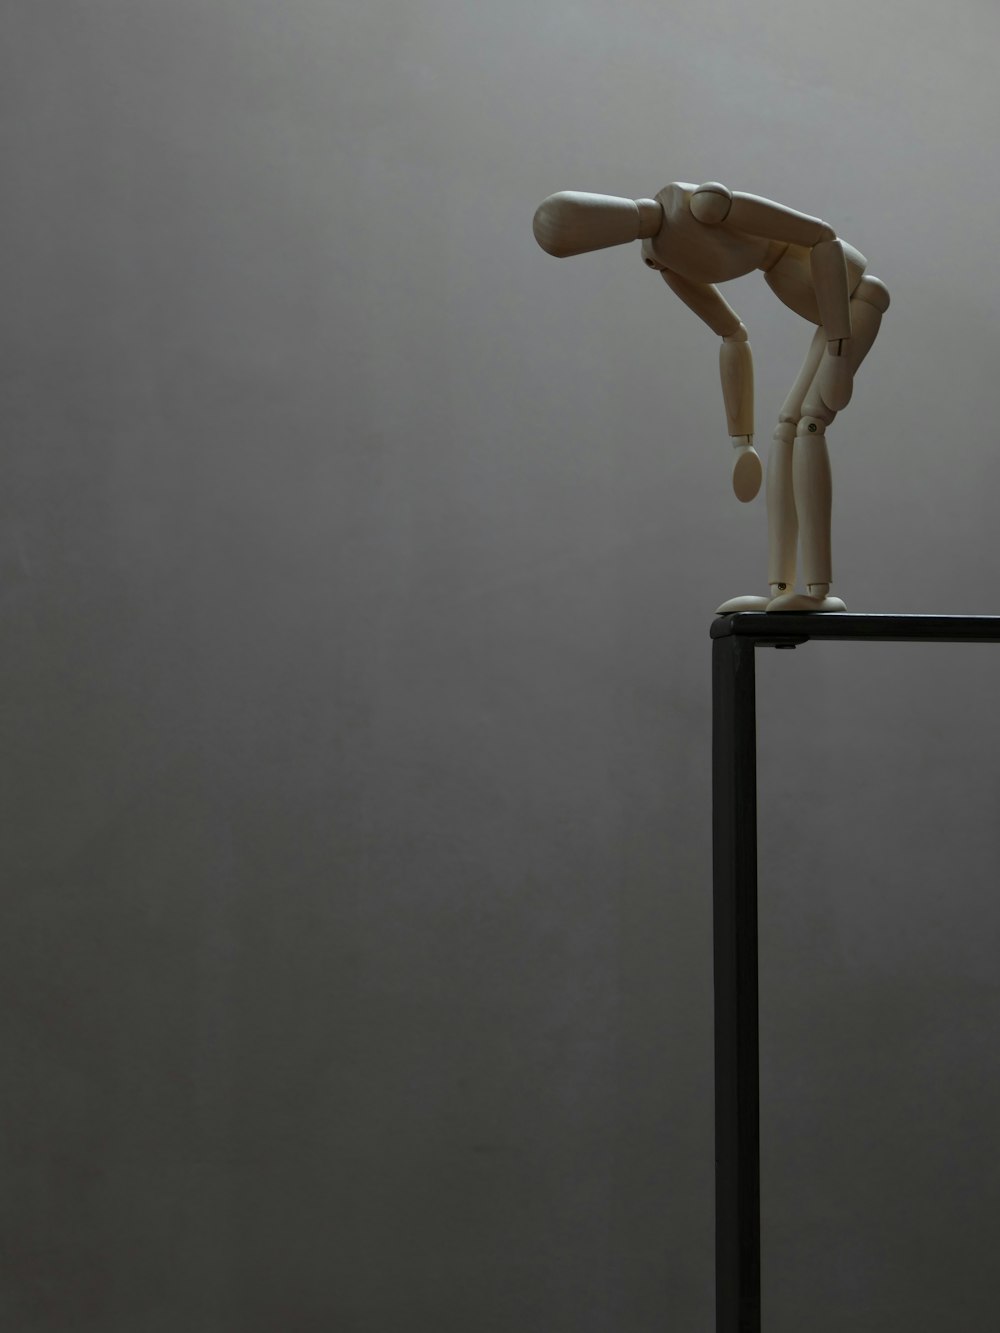 a wooden mannequin standing on top of a metal pole